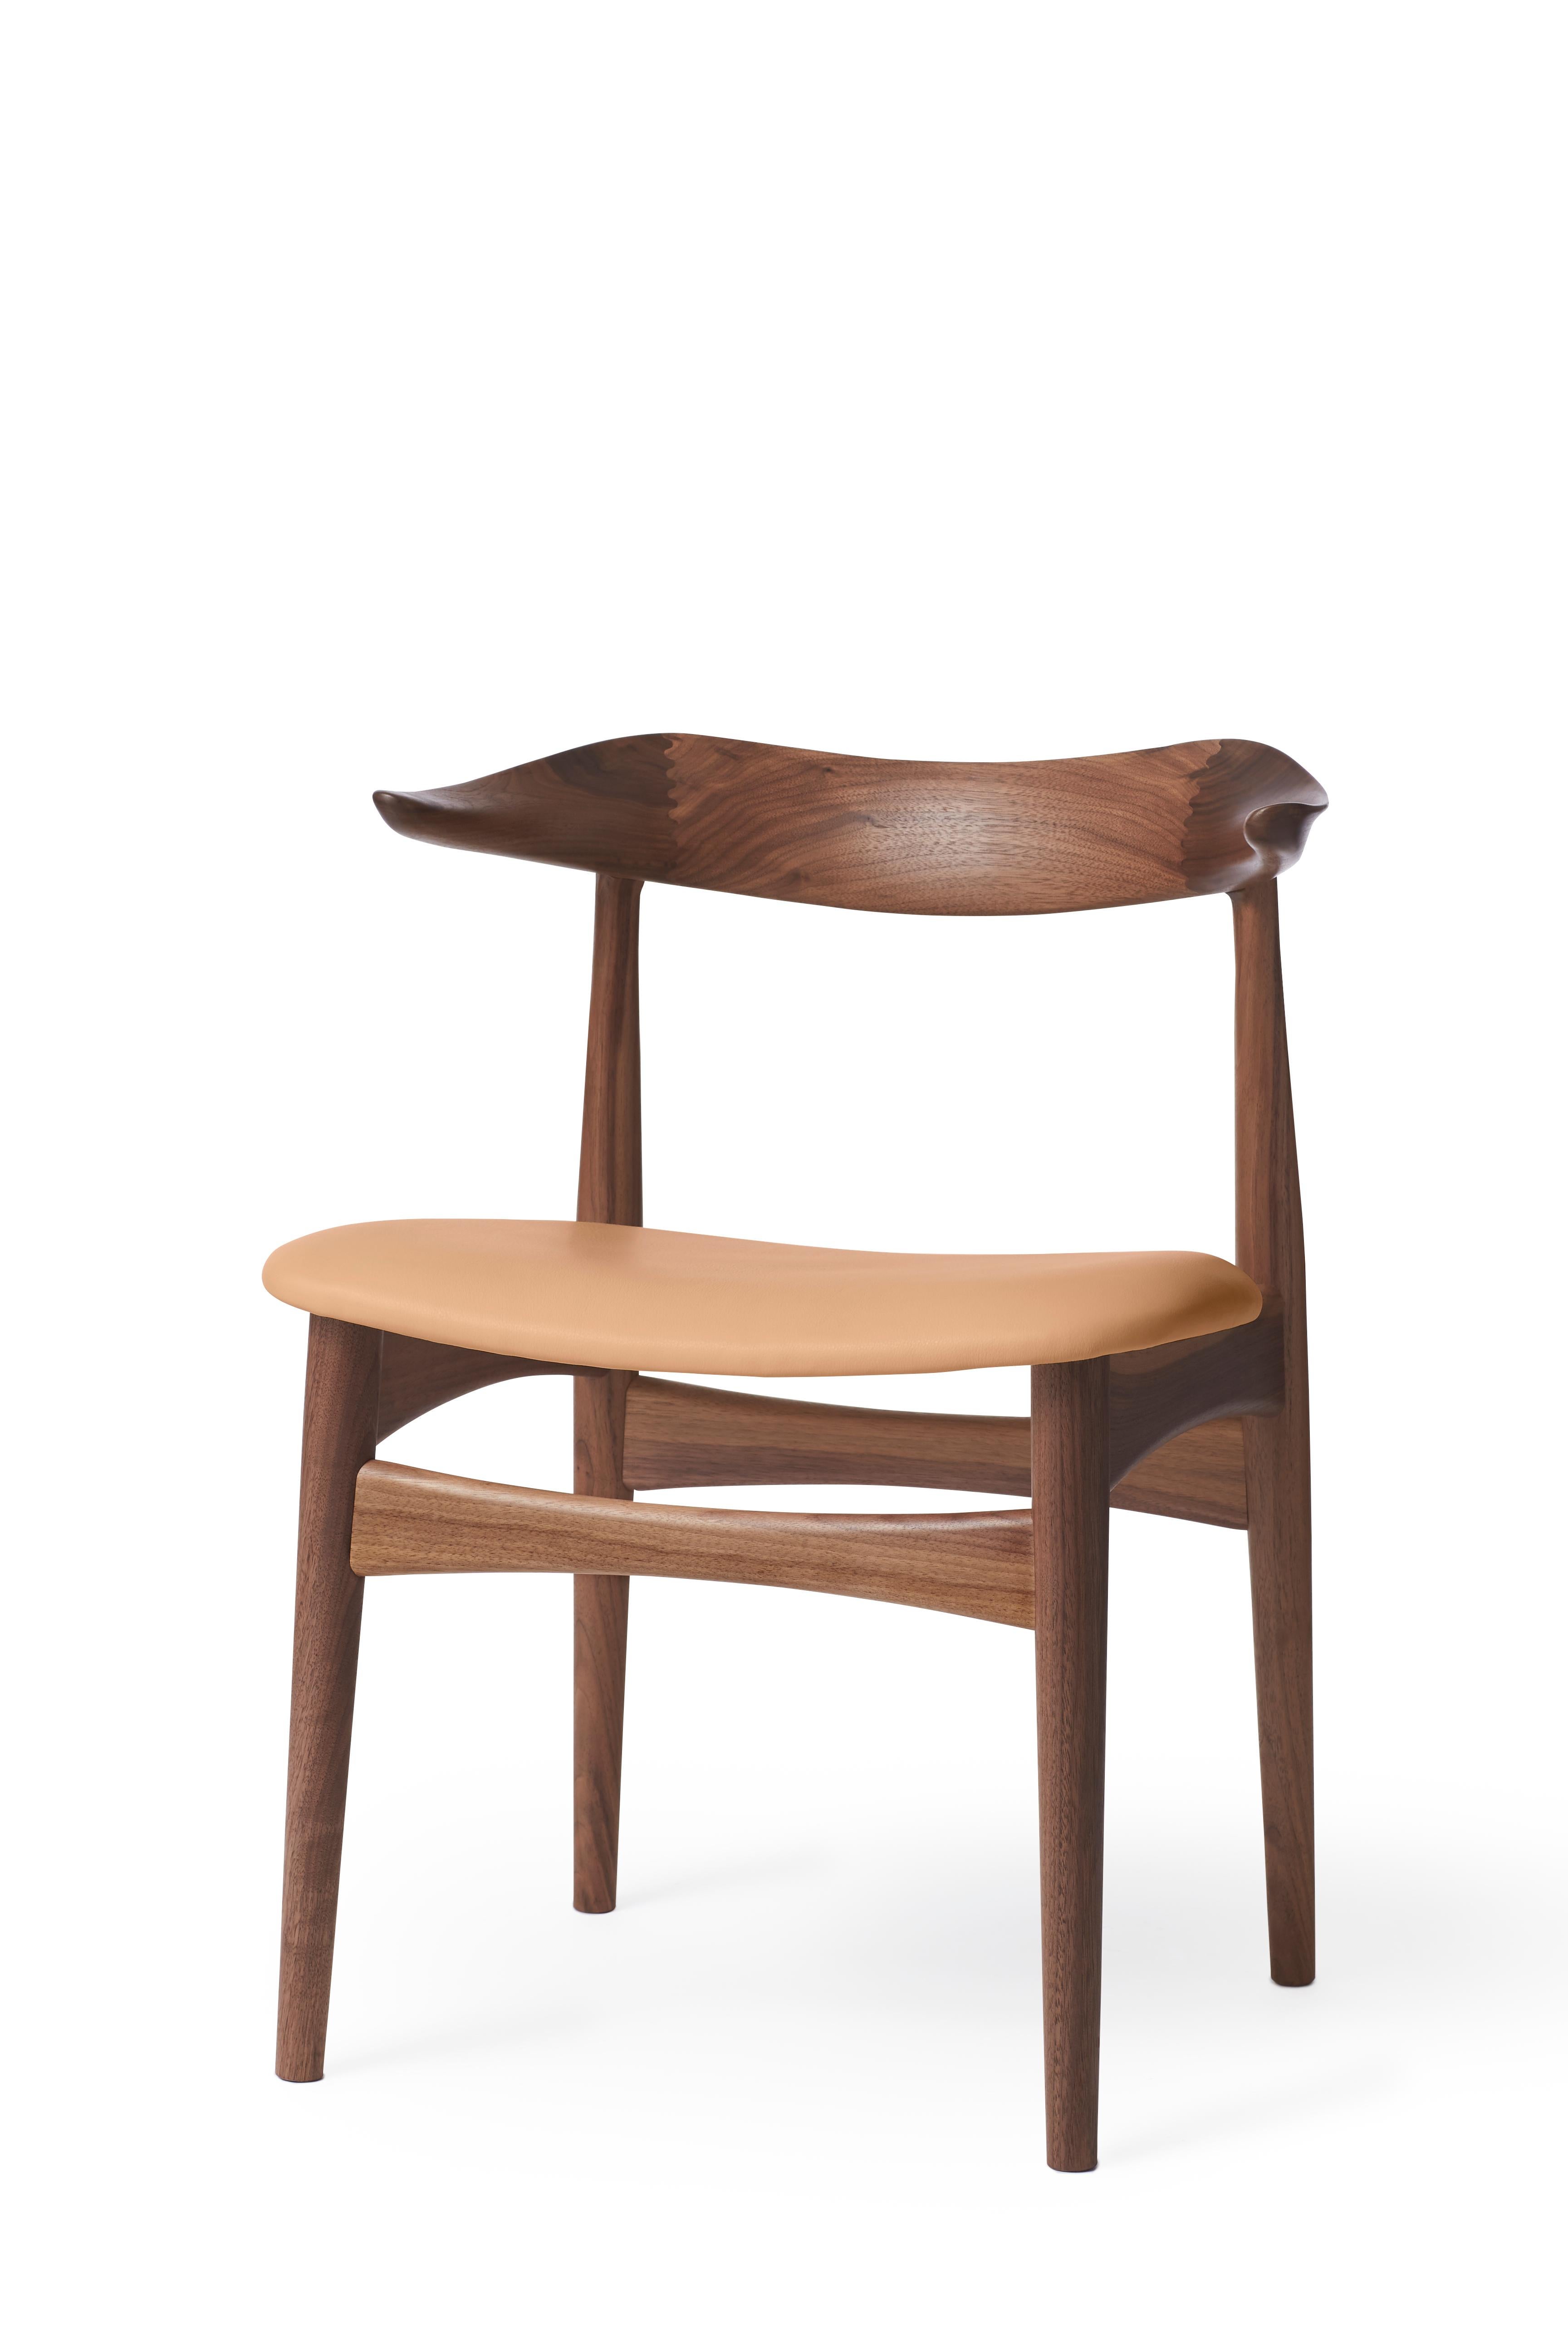 For Sale: Pink (Soavé) Cow Horn Walnut Chair, by Knud Færch from Warm Nordic 2